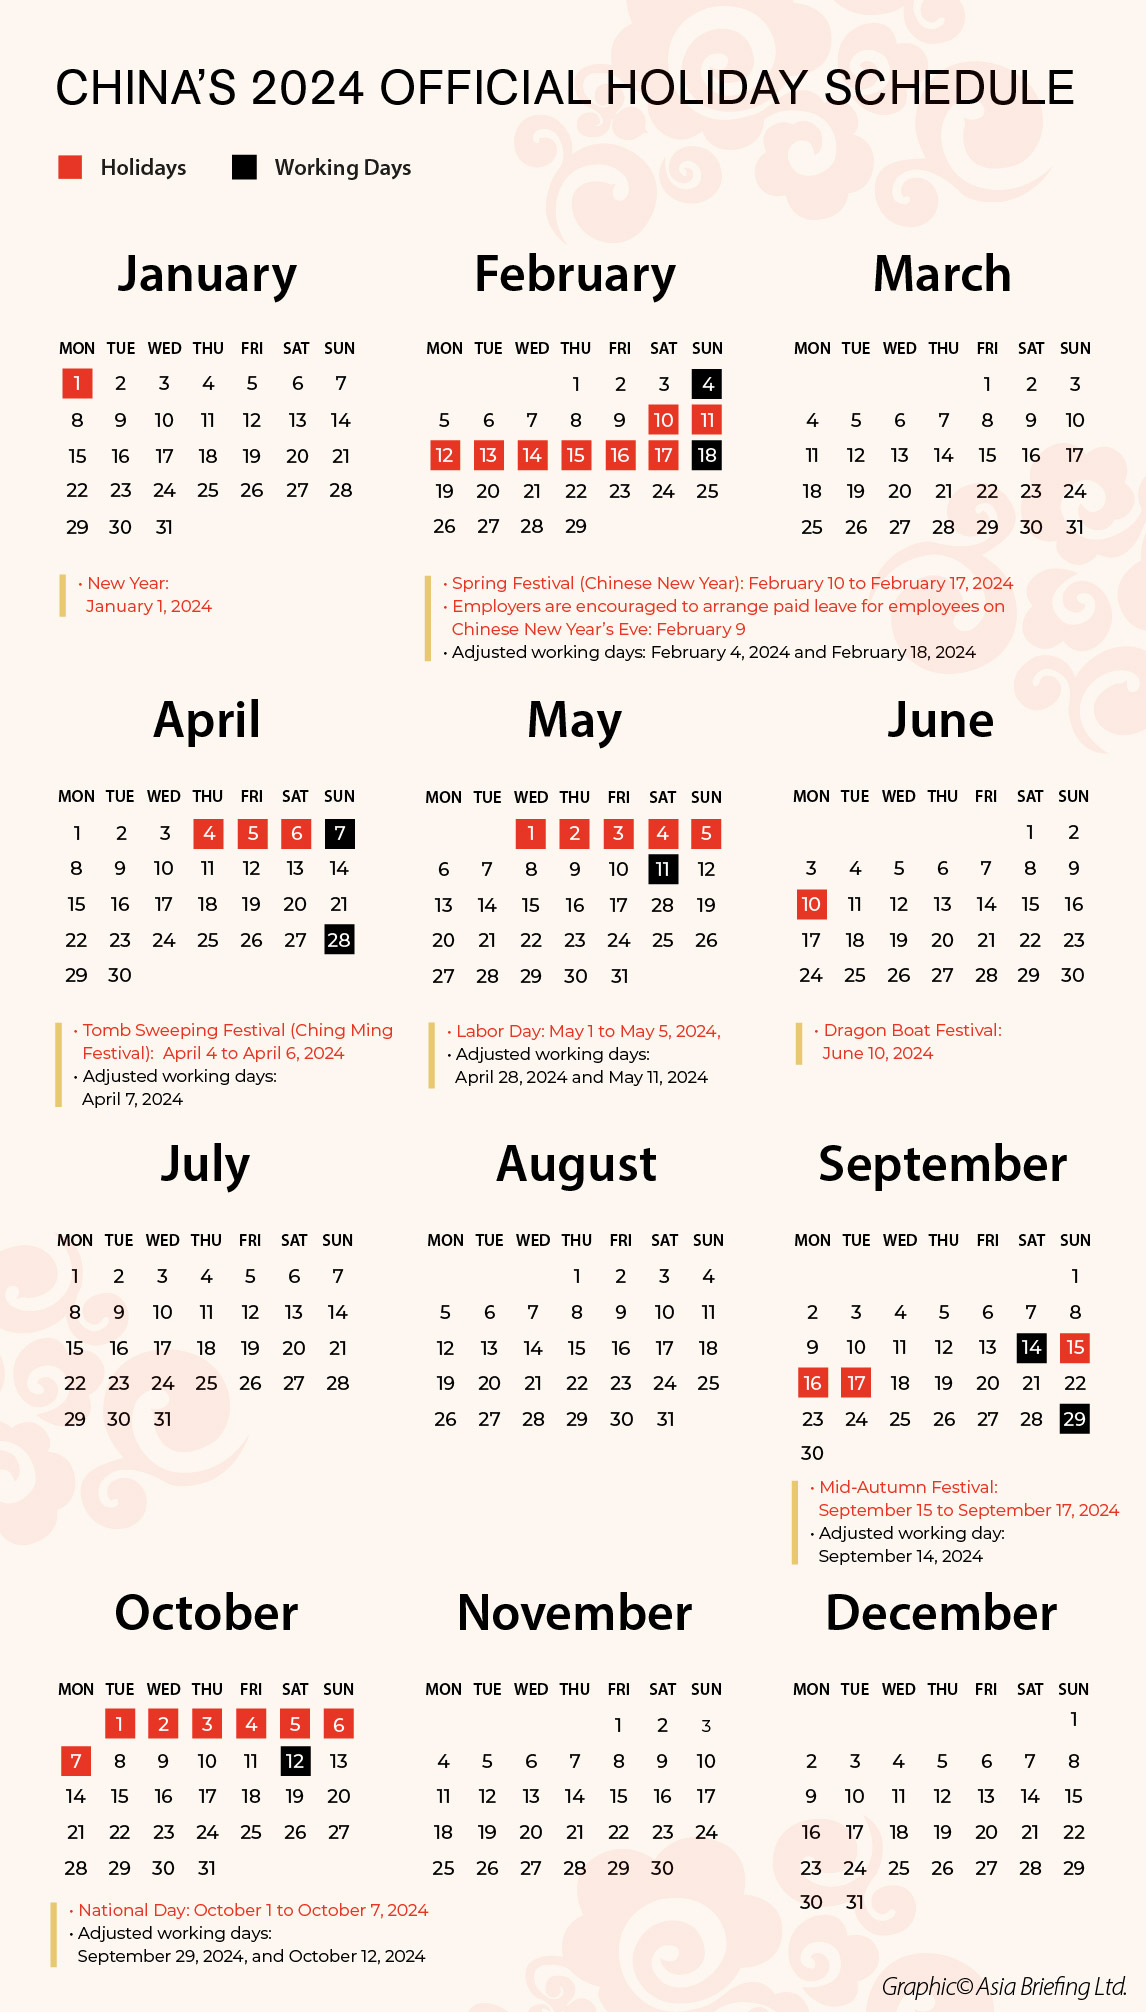 China National Holidays 2024 and Schedule of Adjusted Working Days